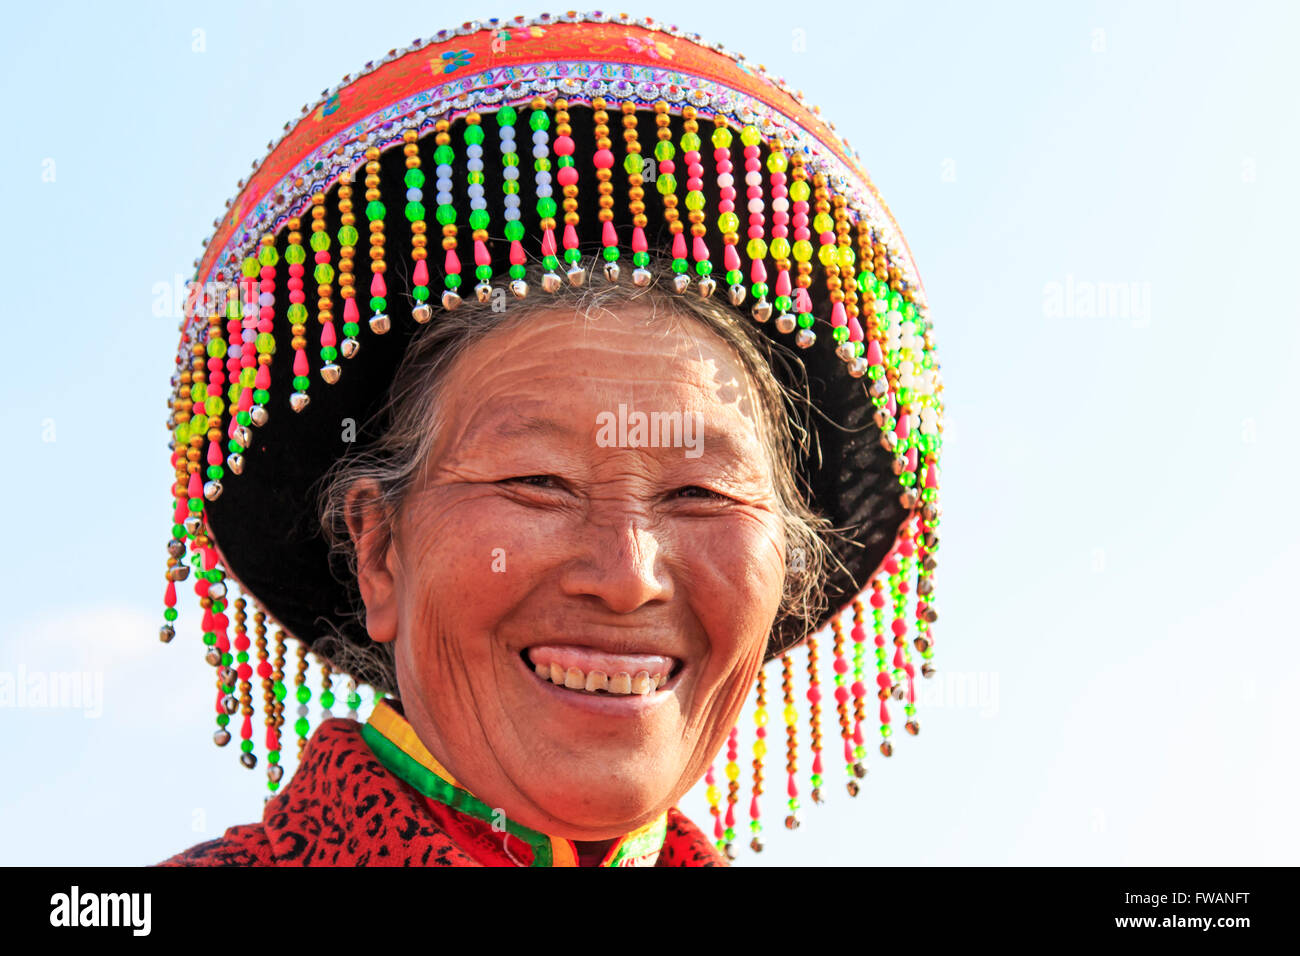 Heqing, China - March 15, 2016: Chinese woman in traditional Miao attire during the Heqing Qifeng Pear Flower festival Stock Photo